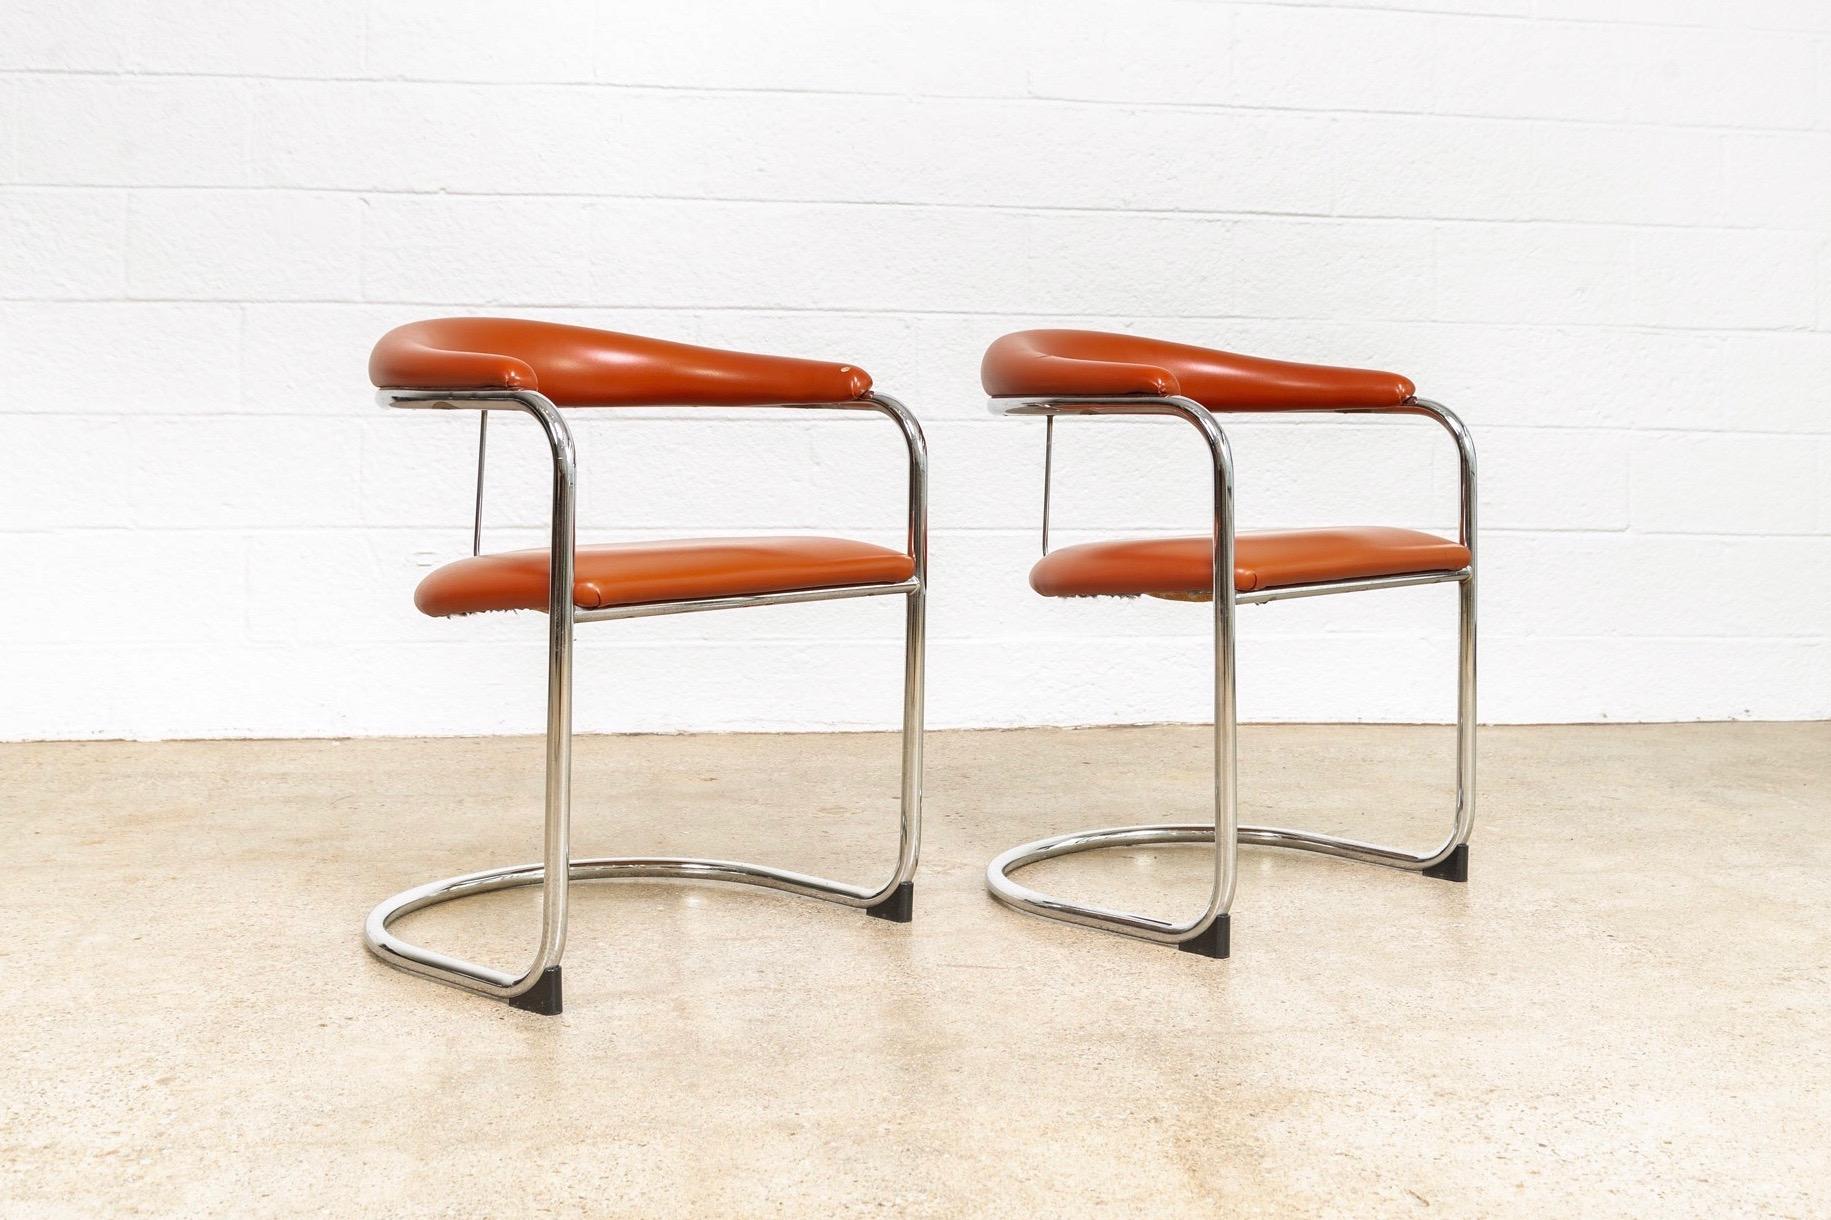 These vintage midcentury model SS33 armchairs circa 1970 were designed by Hungarian designer Anton Lorenz for Thonet in 1929. The Classic Bauhaus design features a sleek, sculptural profile with clean, geometric lines and gentle curves. The seats